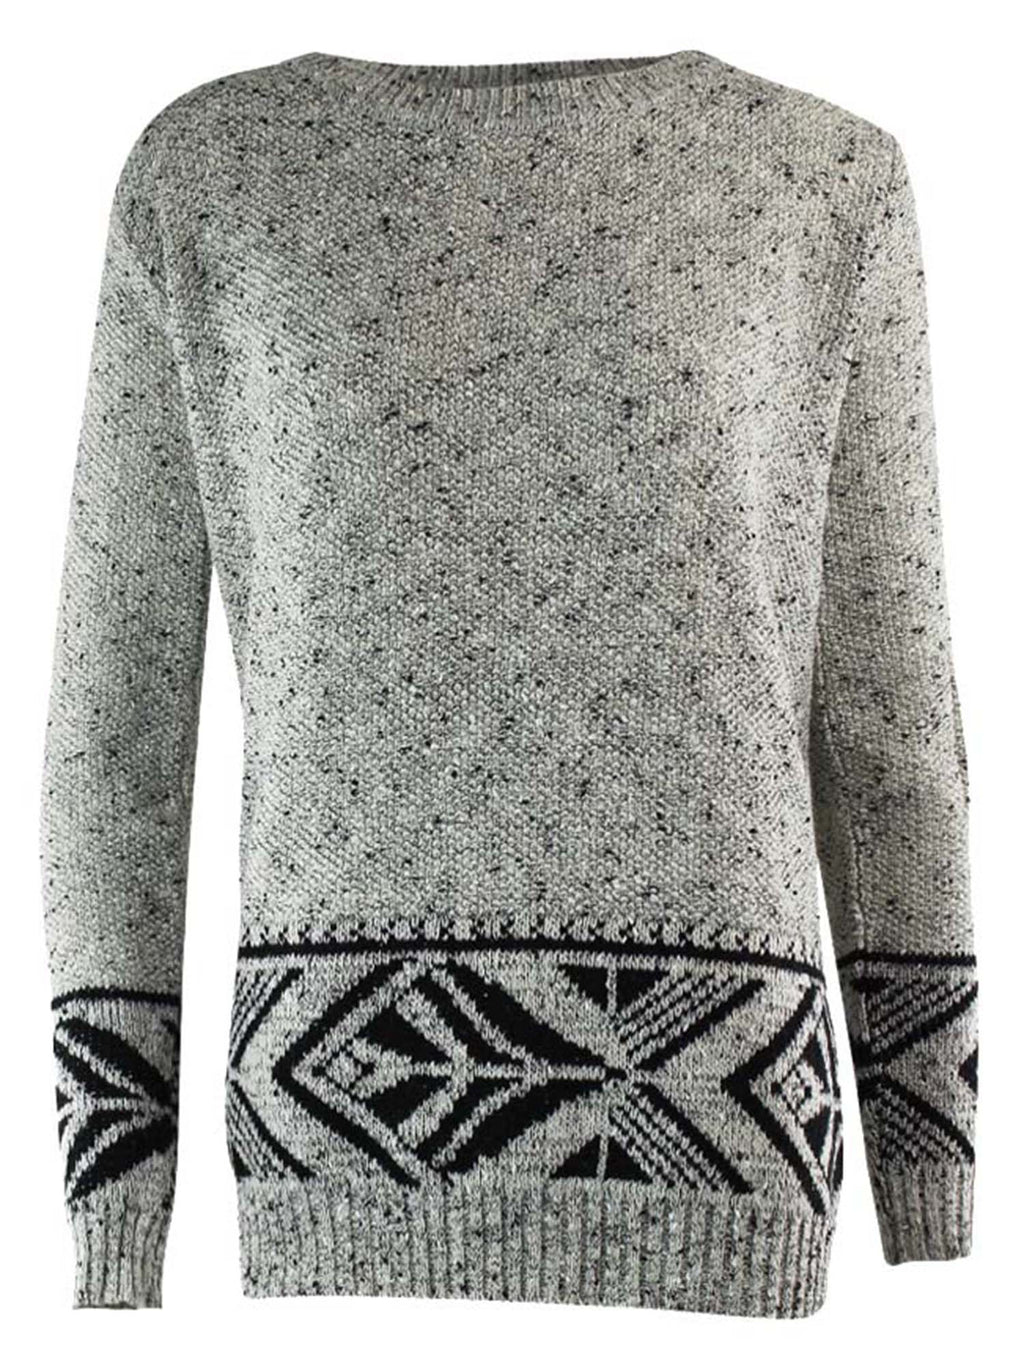 Marled Patterned Long Sweater